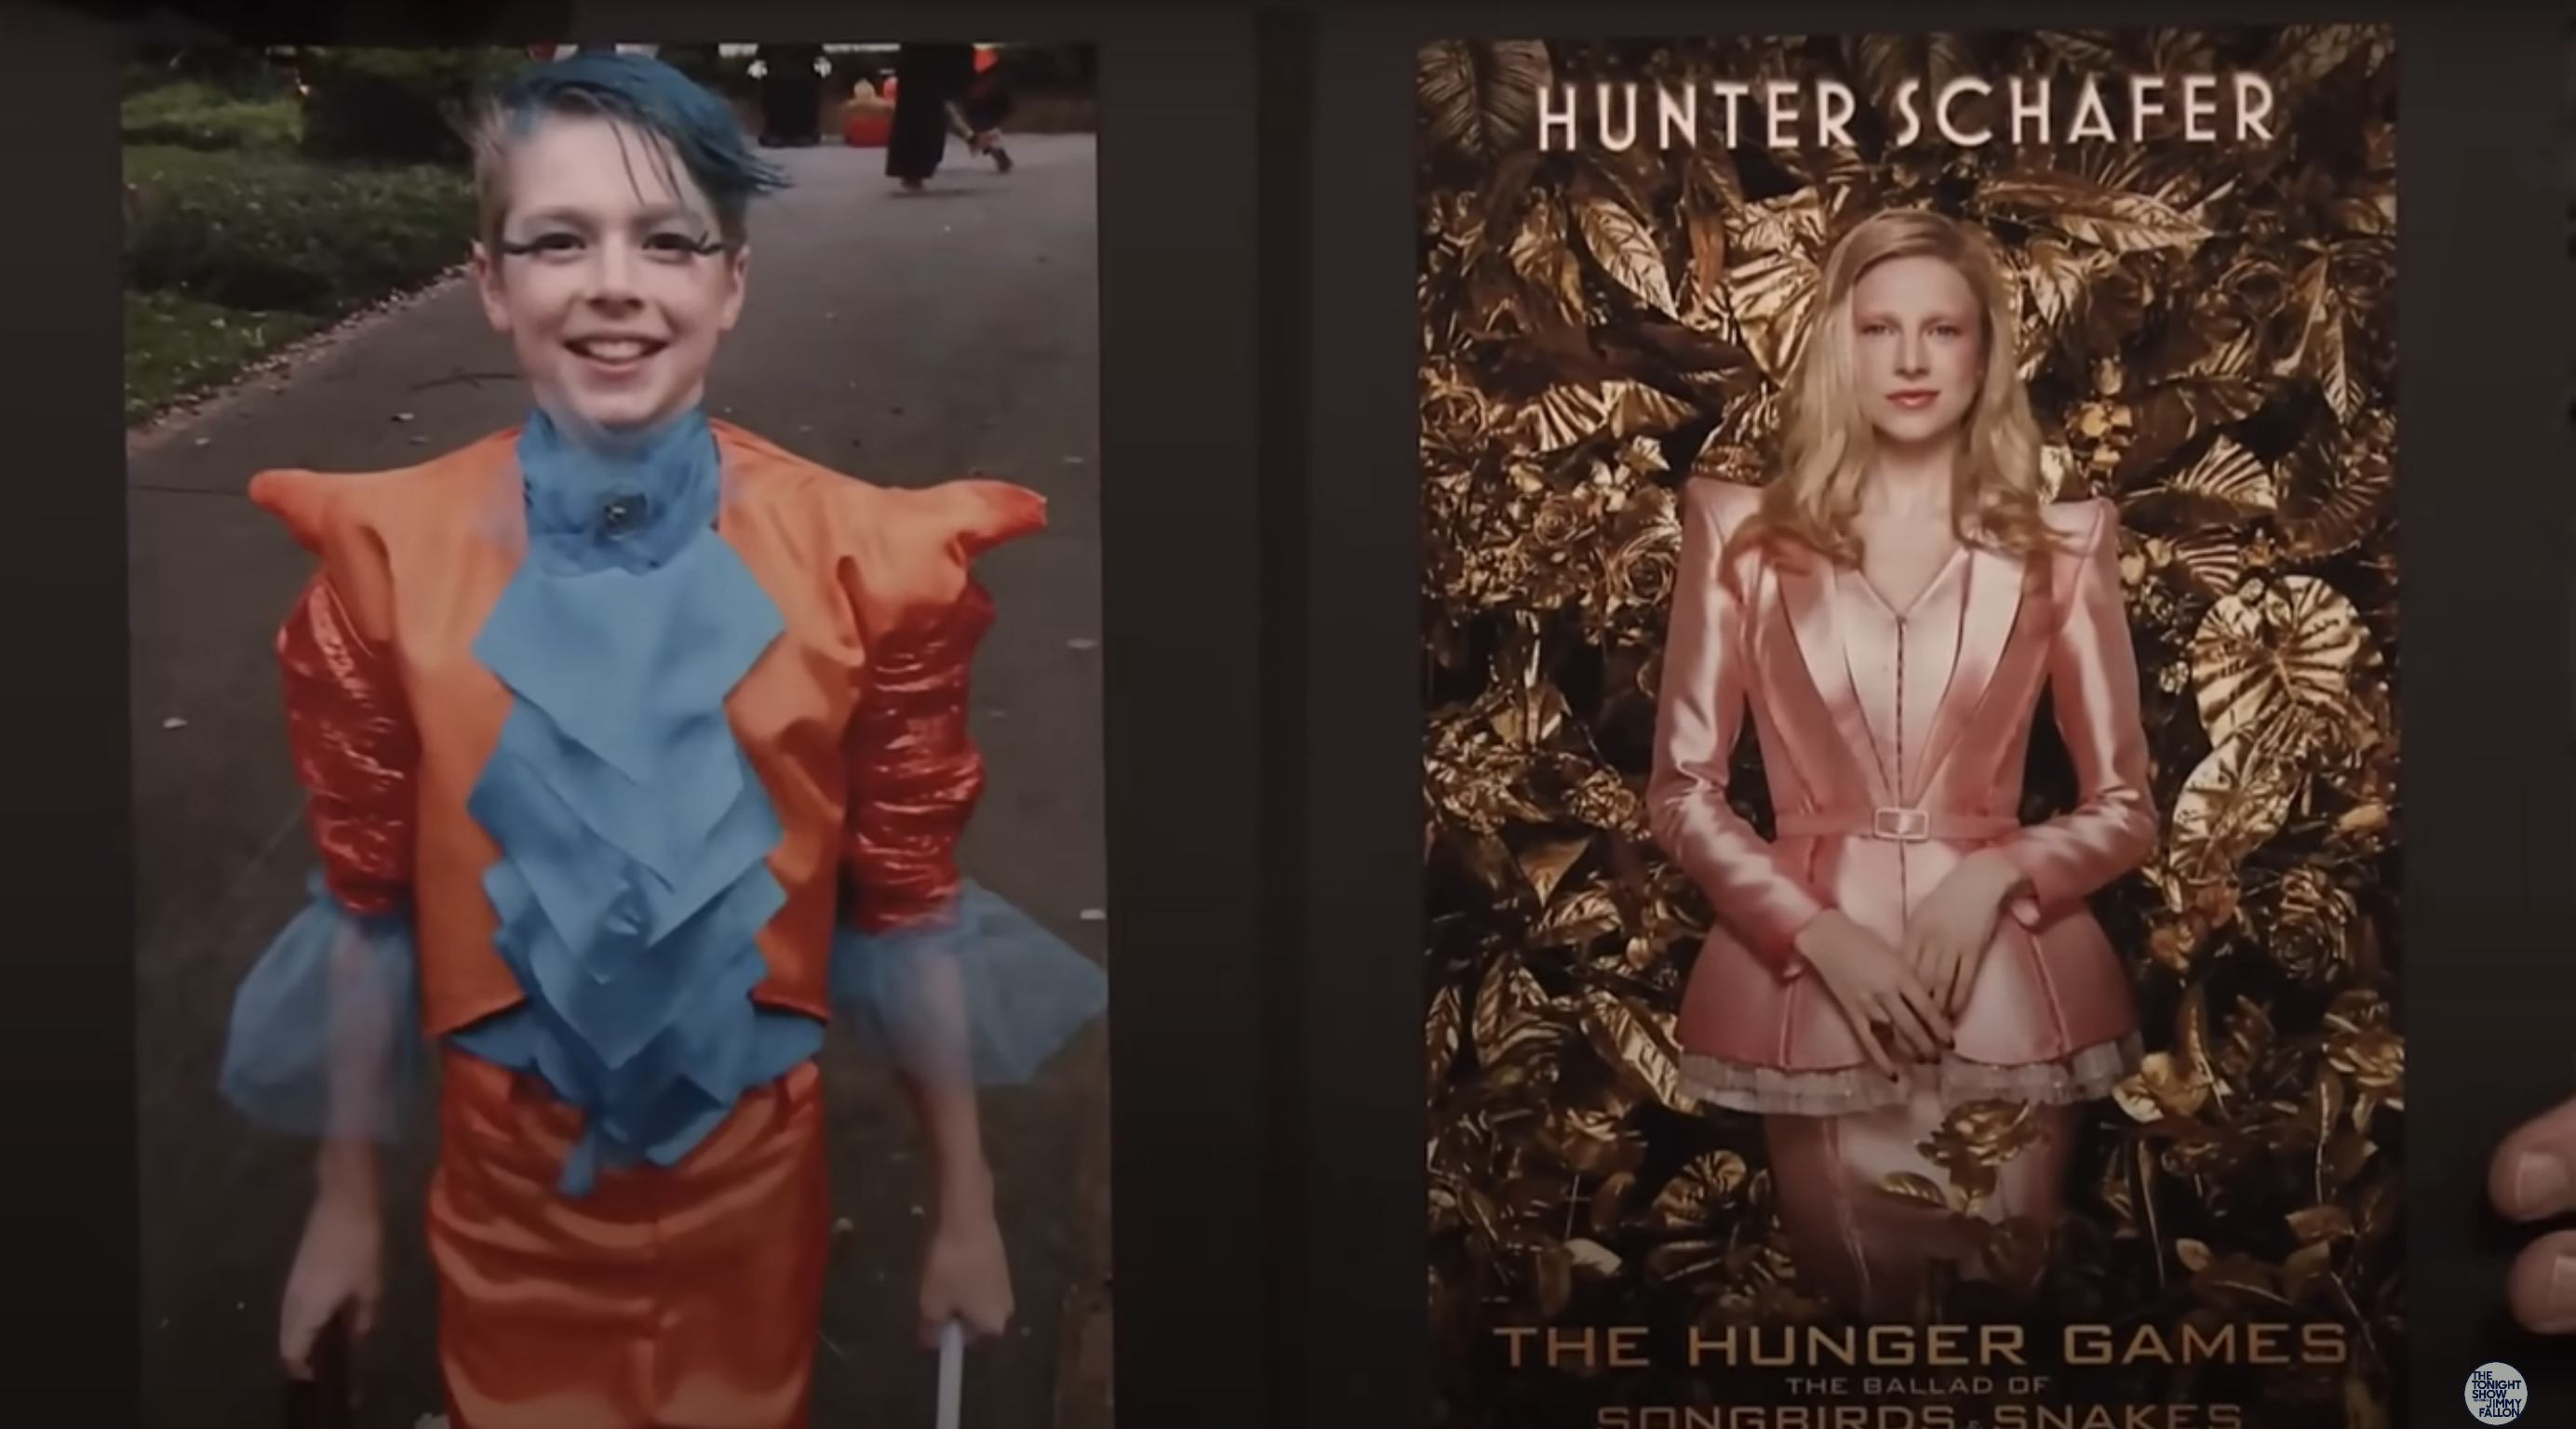 Hunter as a child dressed up for Halloween on the left and Hunter on the poster for The Hunger Games on the right